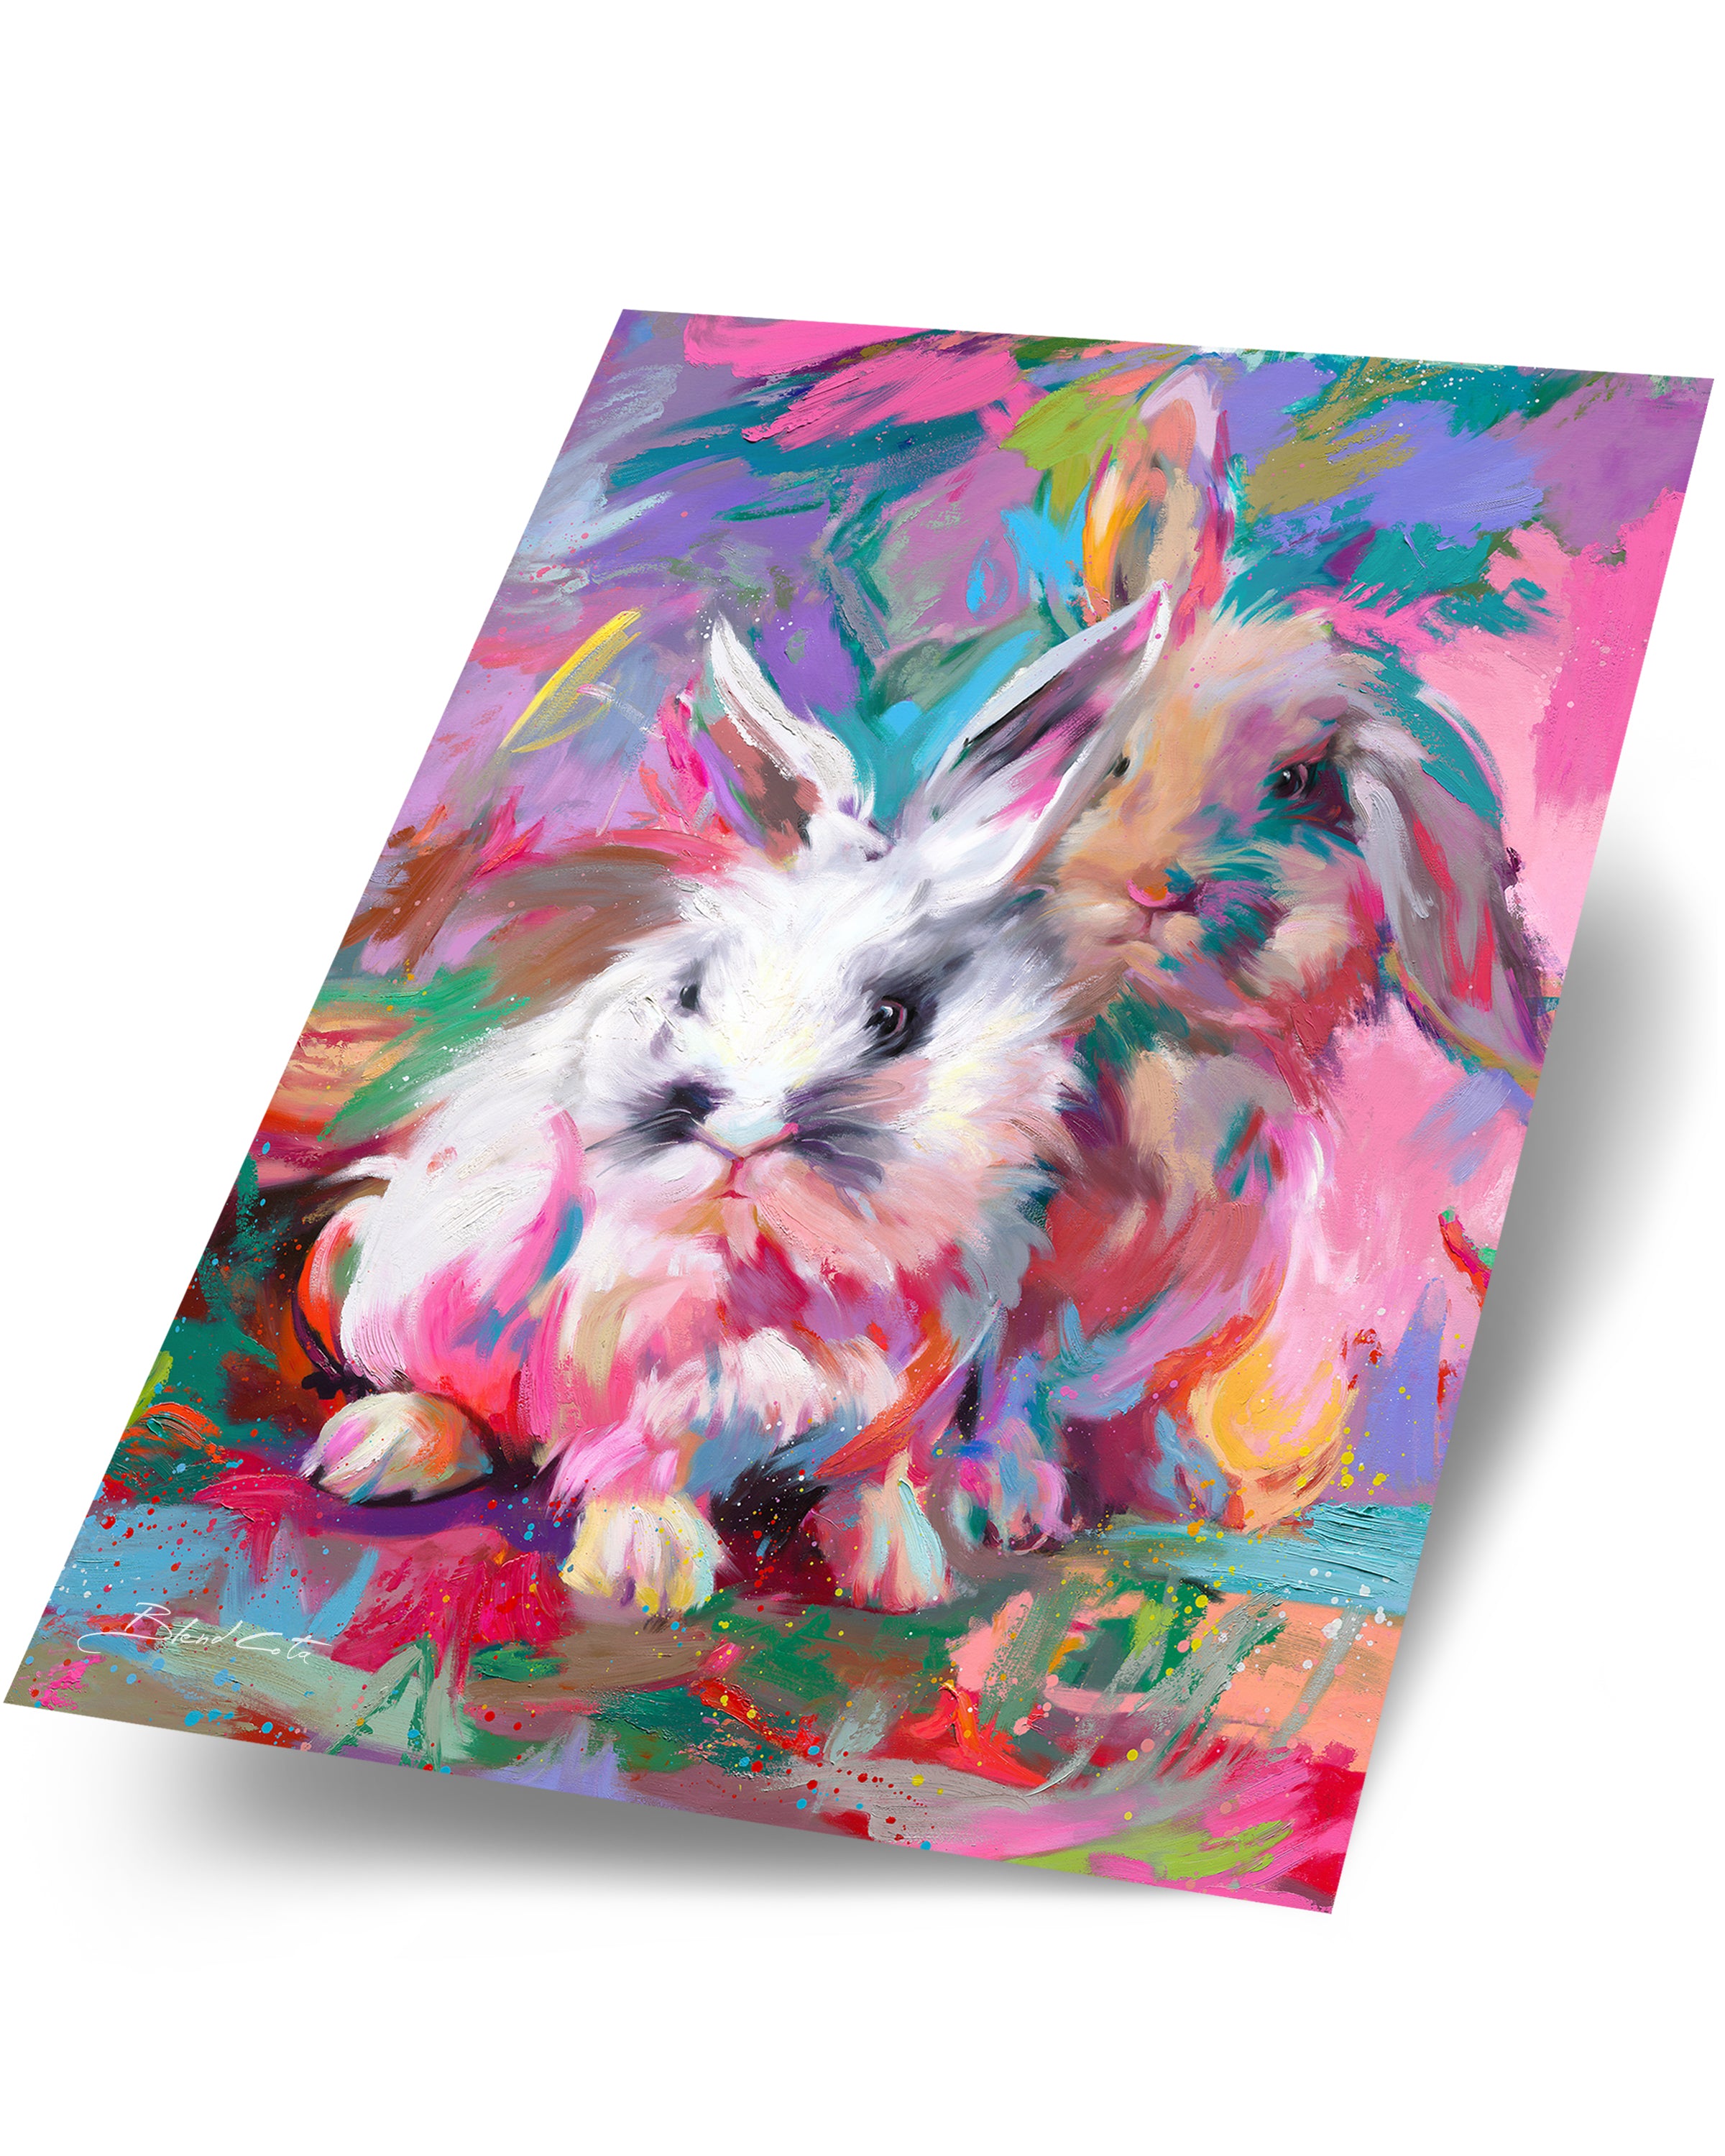 Painting of two fluffy bunnies, rabbits in the spring, Easter abound, with colorful brushstrokes.